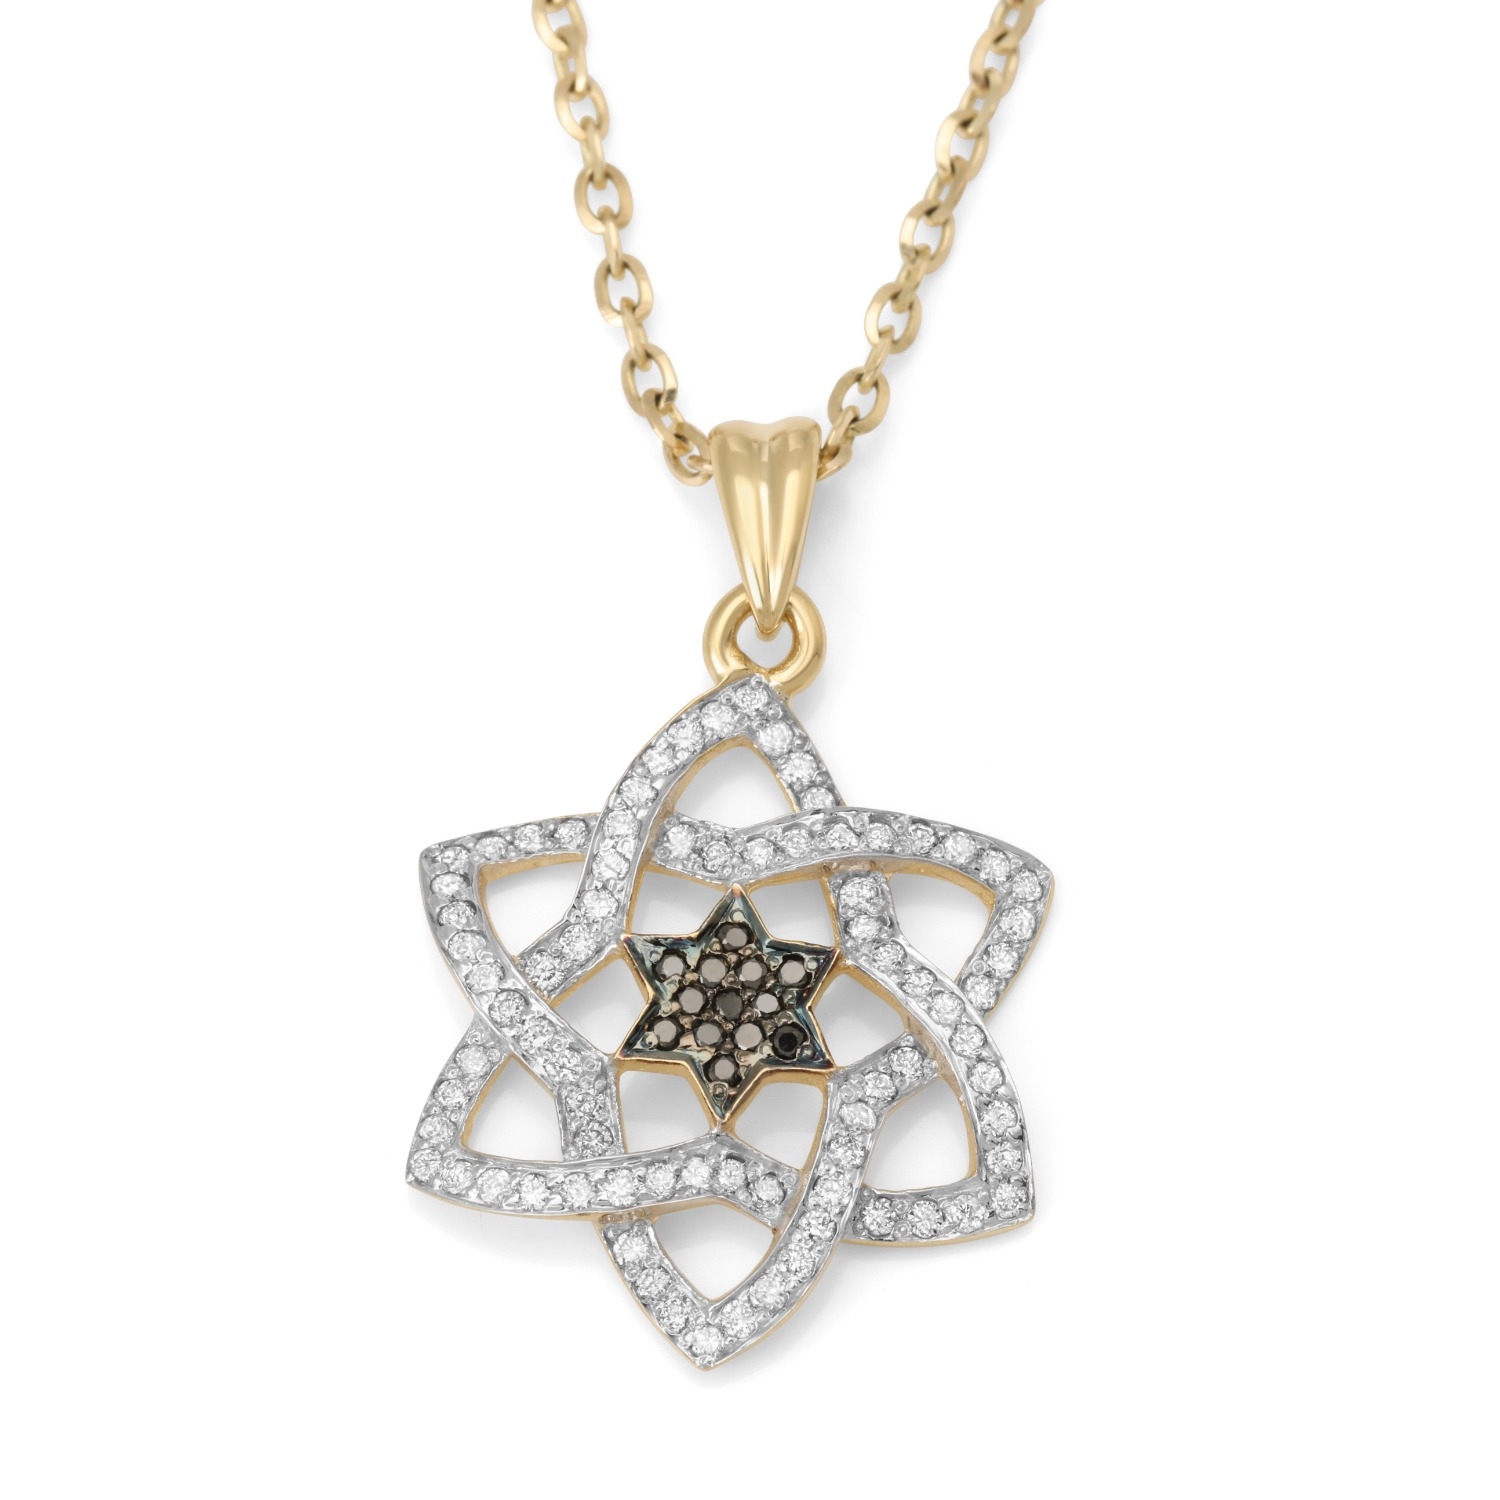 14K Gold Stylish Doubled Star of David Pendant with Black and White Diamonds - 1